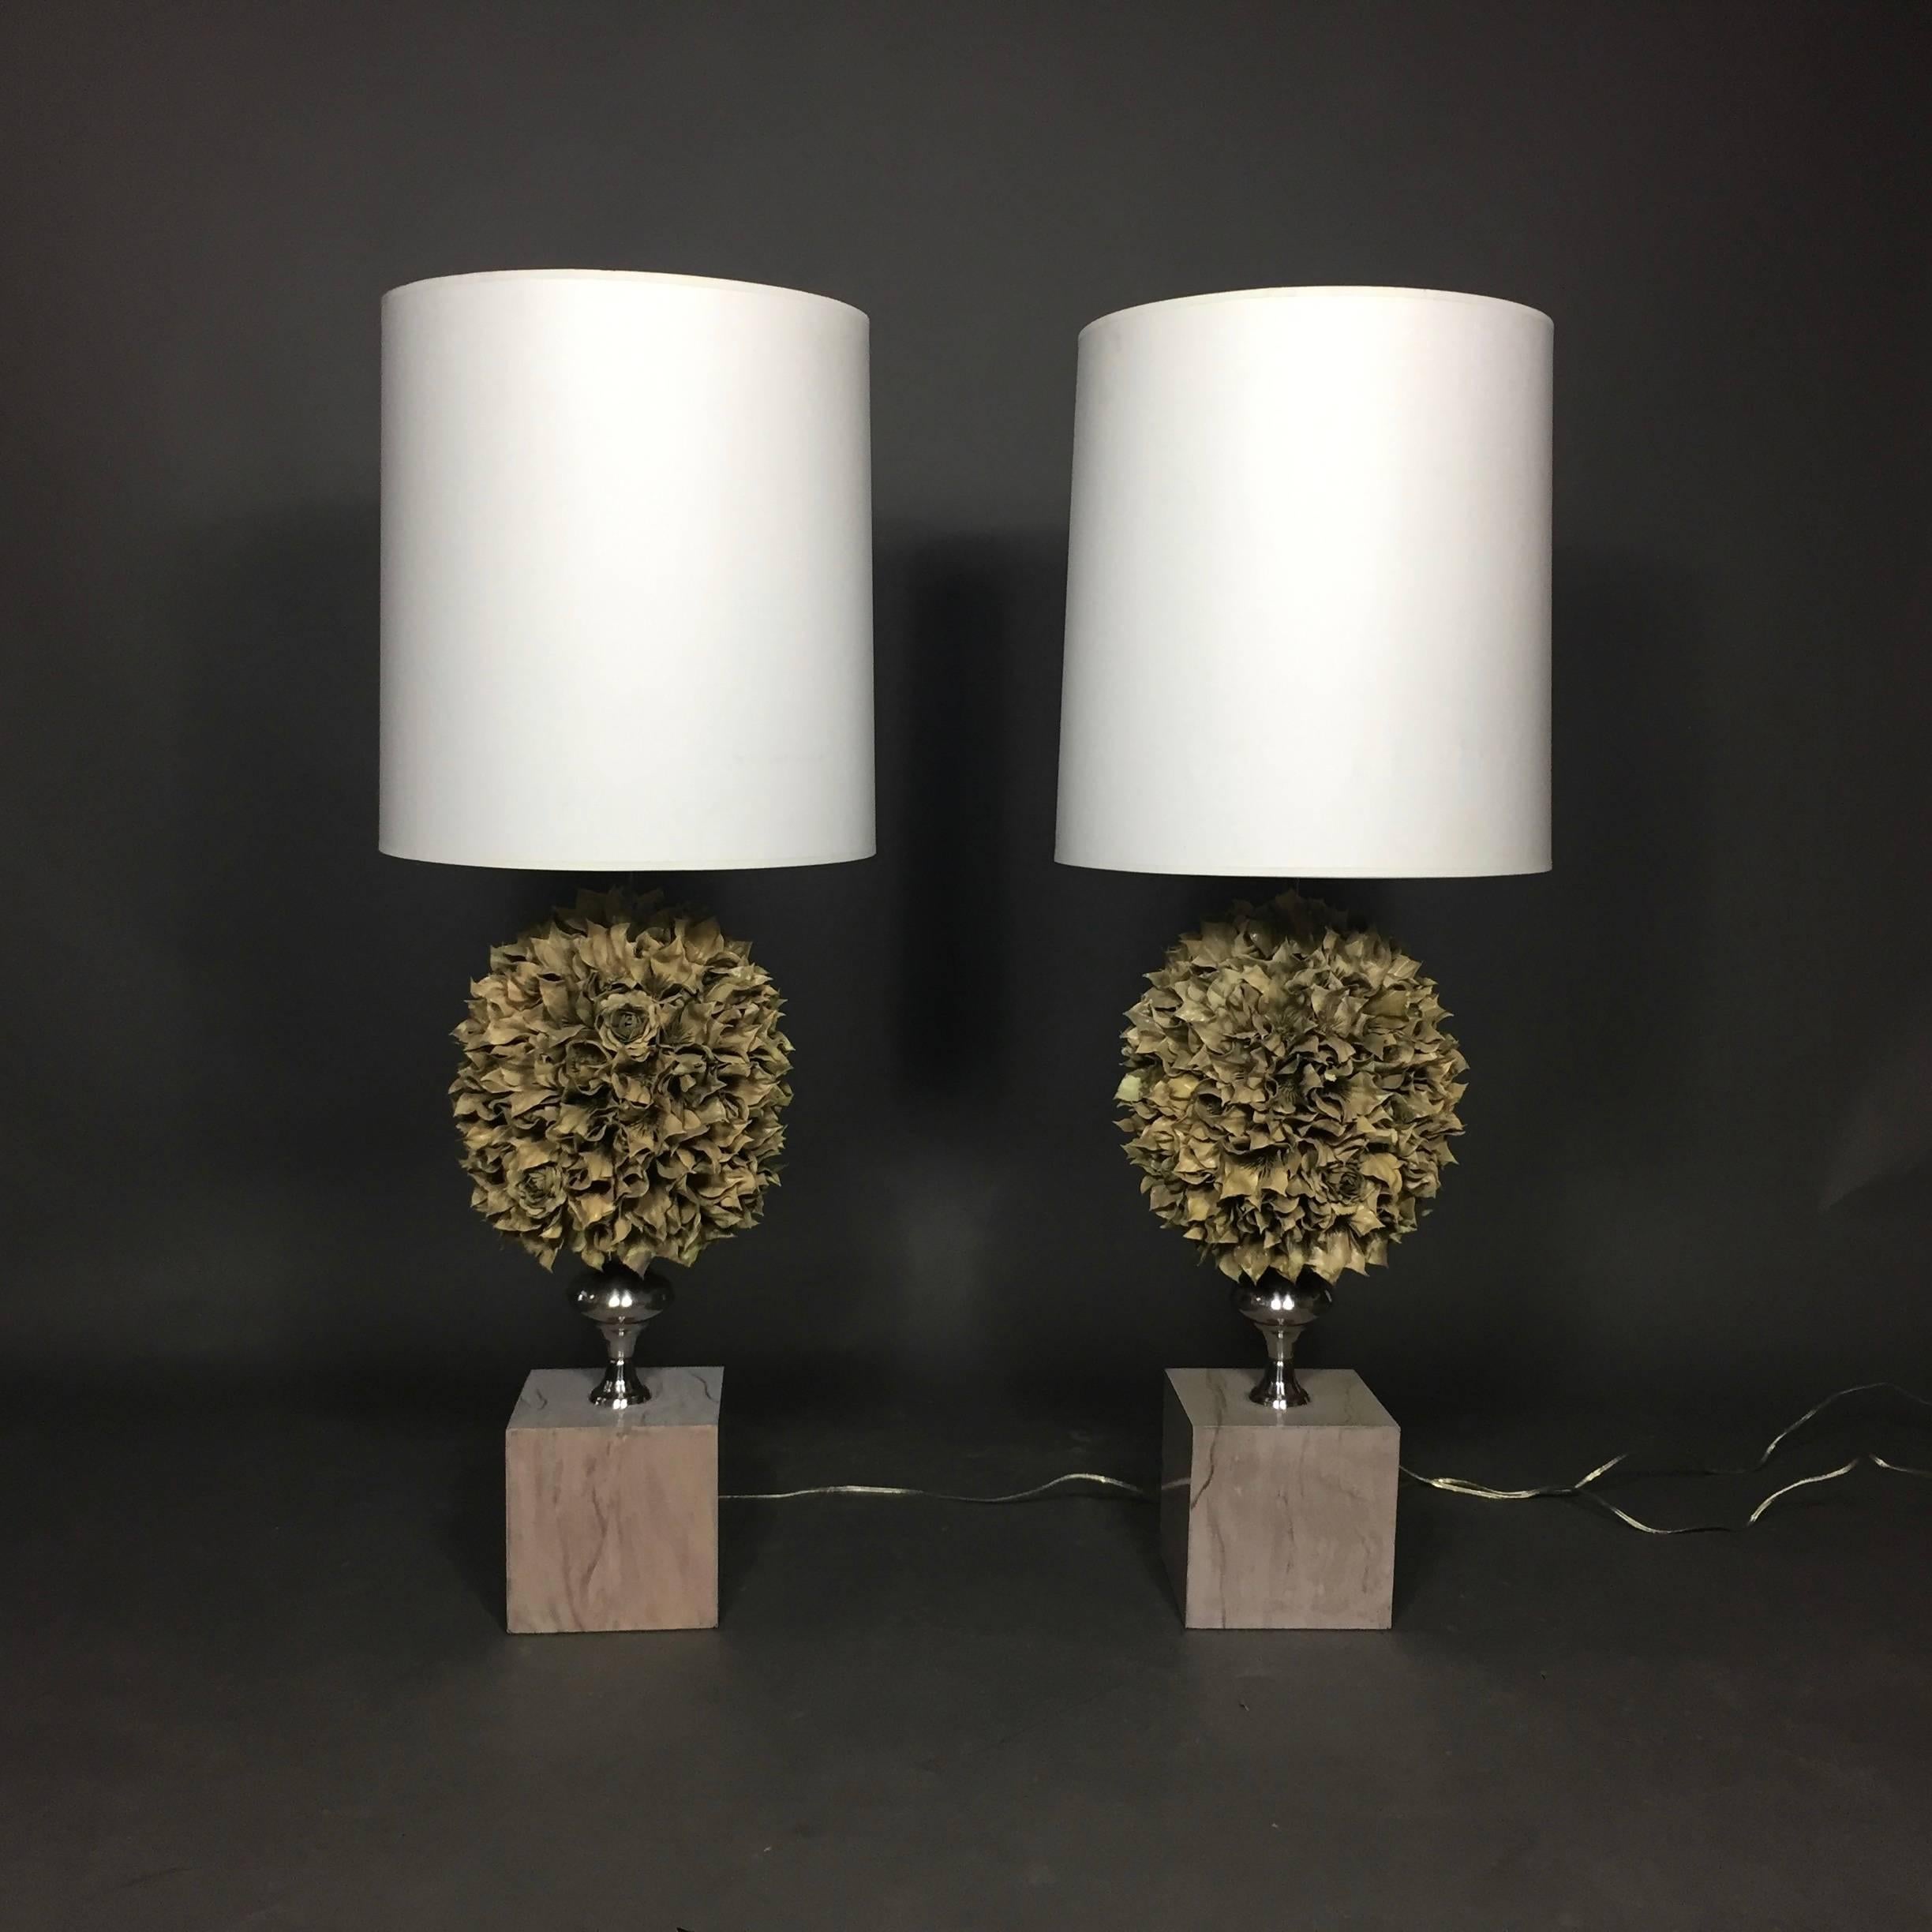 Gorgeous scale and warmth of mood on these pair of tall floral cluster lamps made from painted composite material over chrome and painted marble bases (weighted). Two-bulb design, late 1970s-early 1980s, likely American. Some paint loss to floral